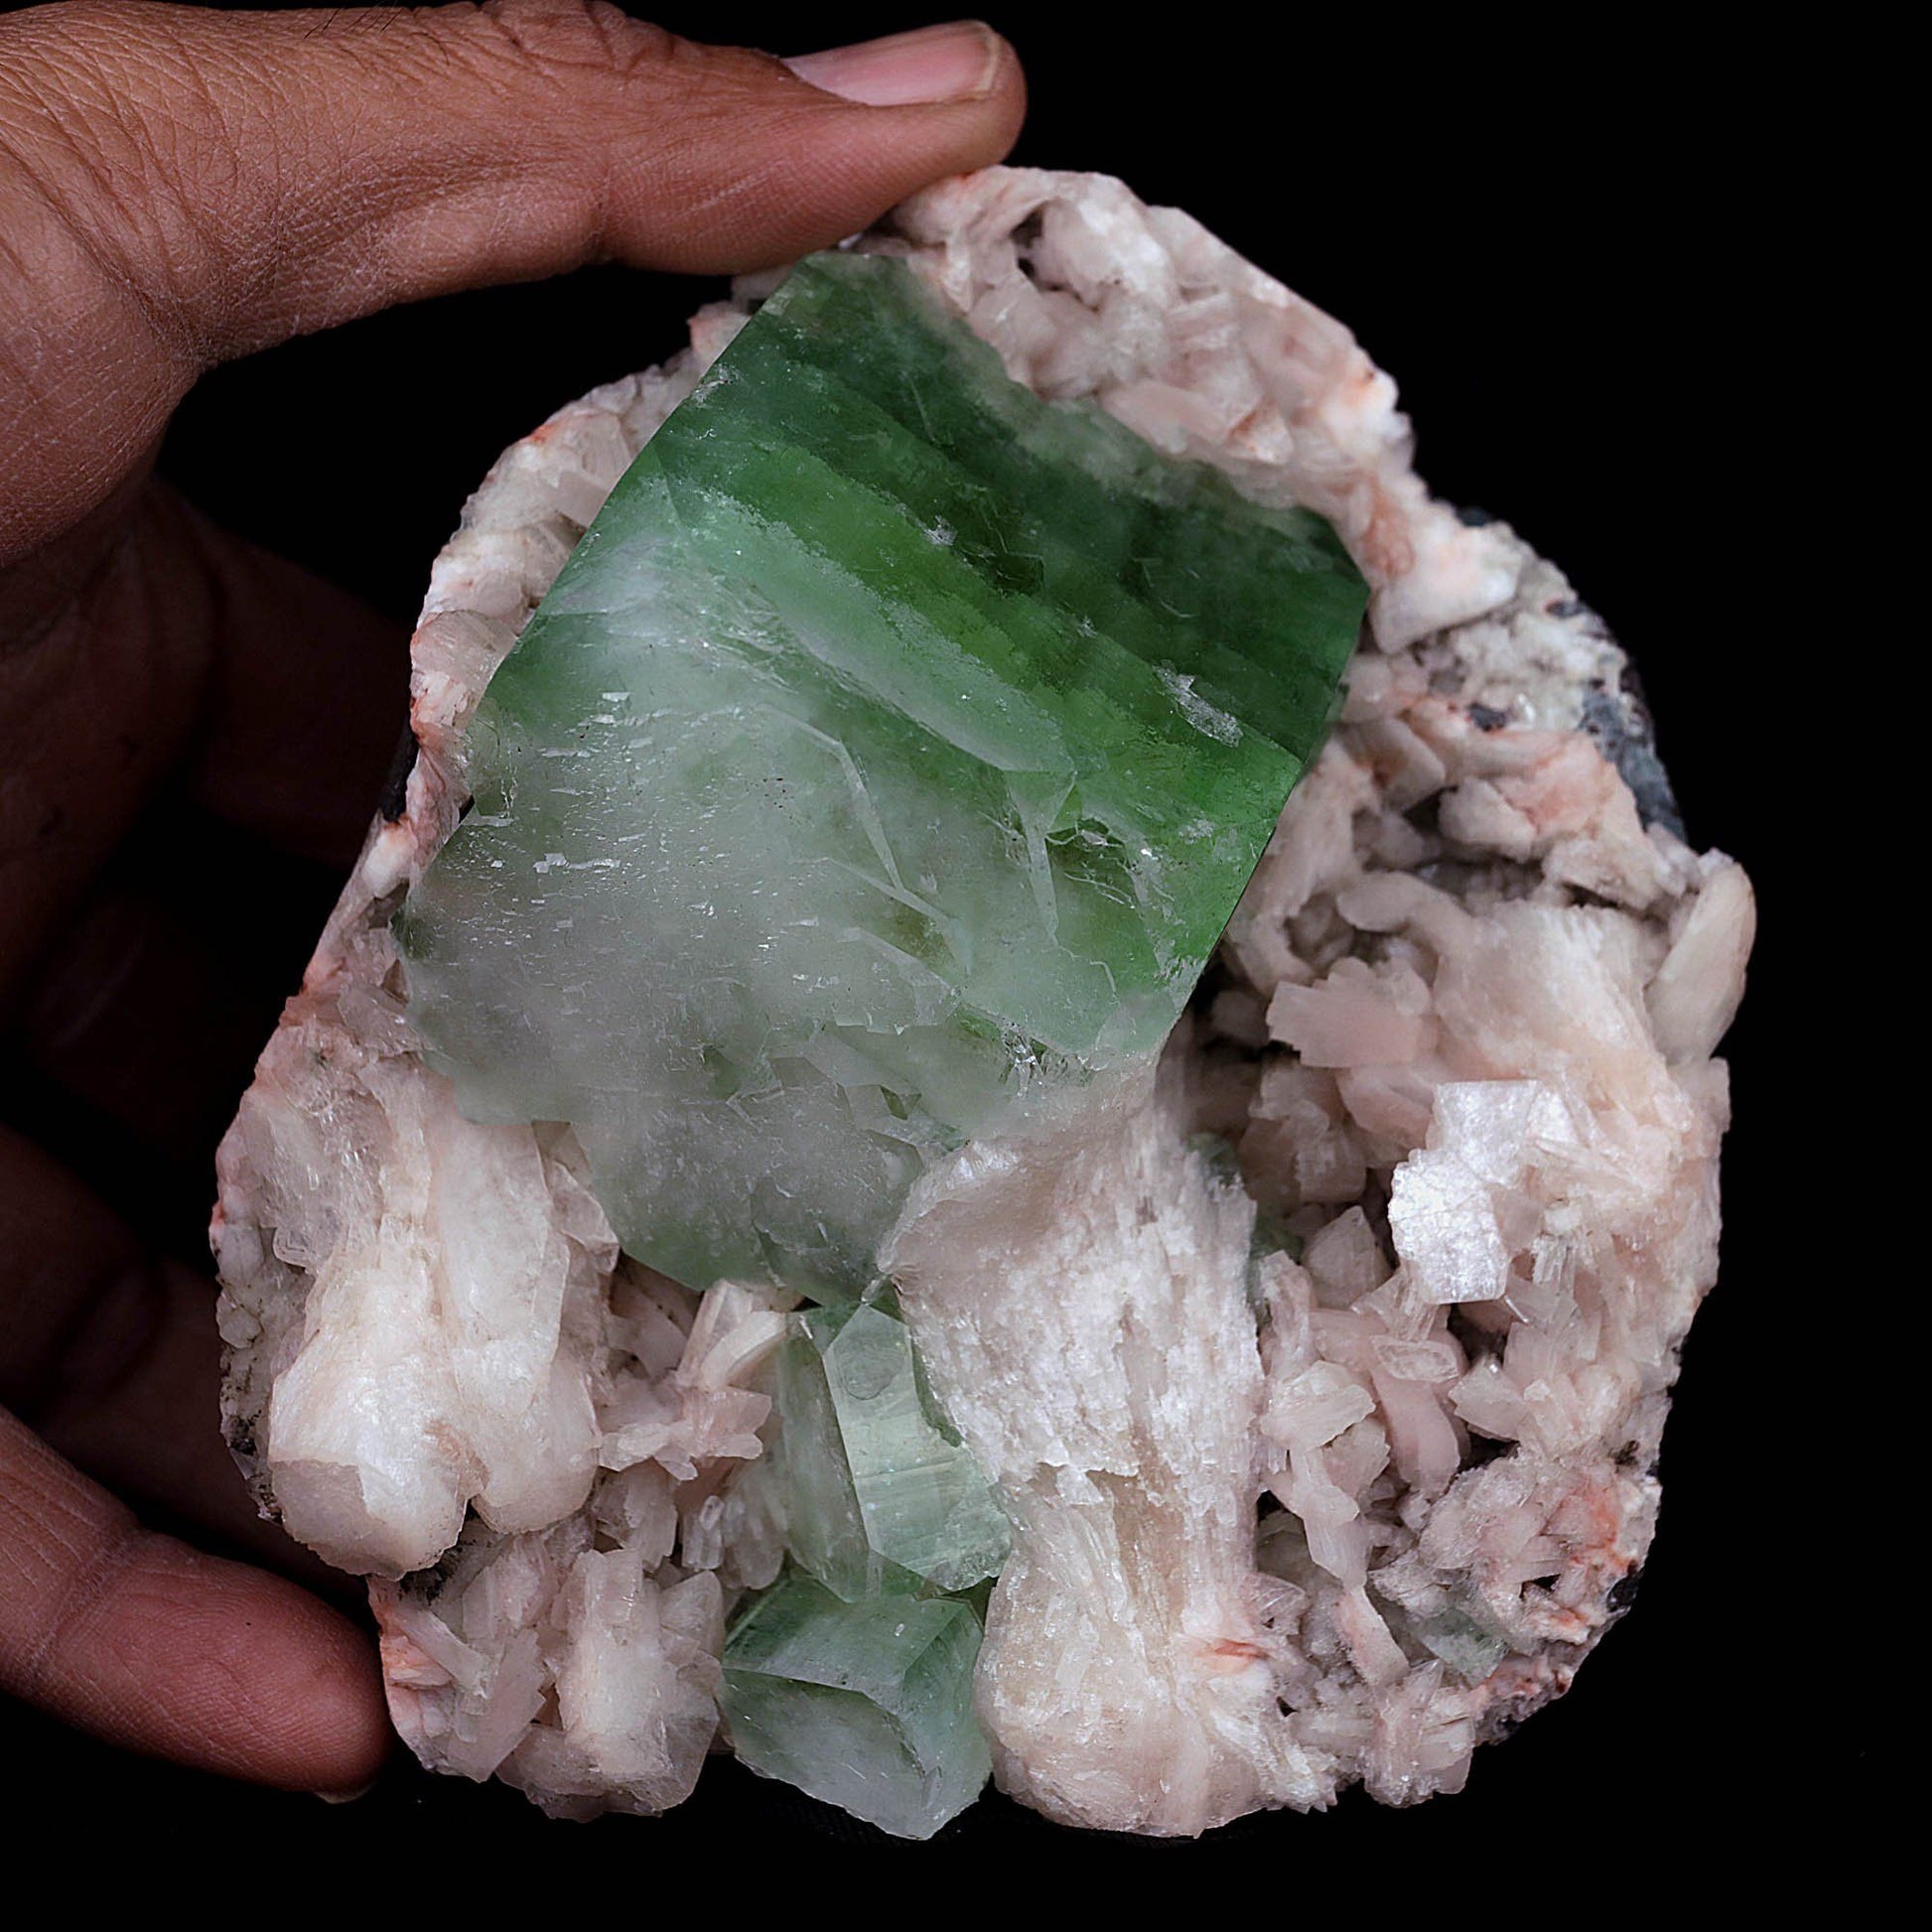 Green Apophyllite Cube with Stilbite Heulandite Natural Mineral # B 41…  https://www.superbminerals.us/products/green-apophyllite-cube-with-stilbite-heulandite-natural-mineral-b-4161  Features:Large shallow vug with a transparent penetrating layerd dark green to mint green Apophyllite cubic crystal on druzy chalcedony formations with Stilbite crystals, all on a bed of white miniature Huelandite crystals on a dark gray Matrix. The color of the Apophyllite is exceptional as is the contrast 